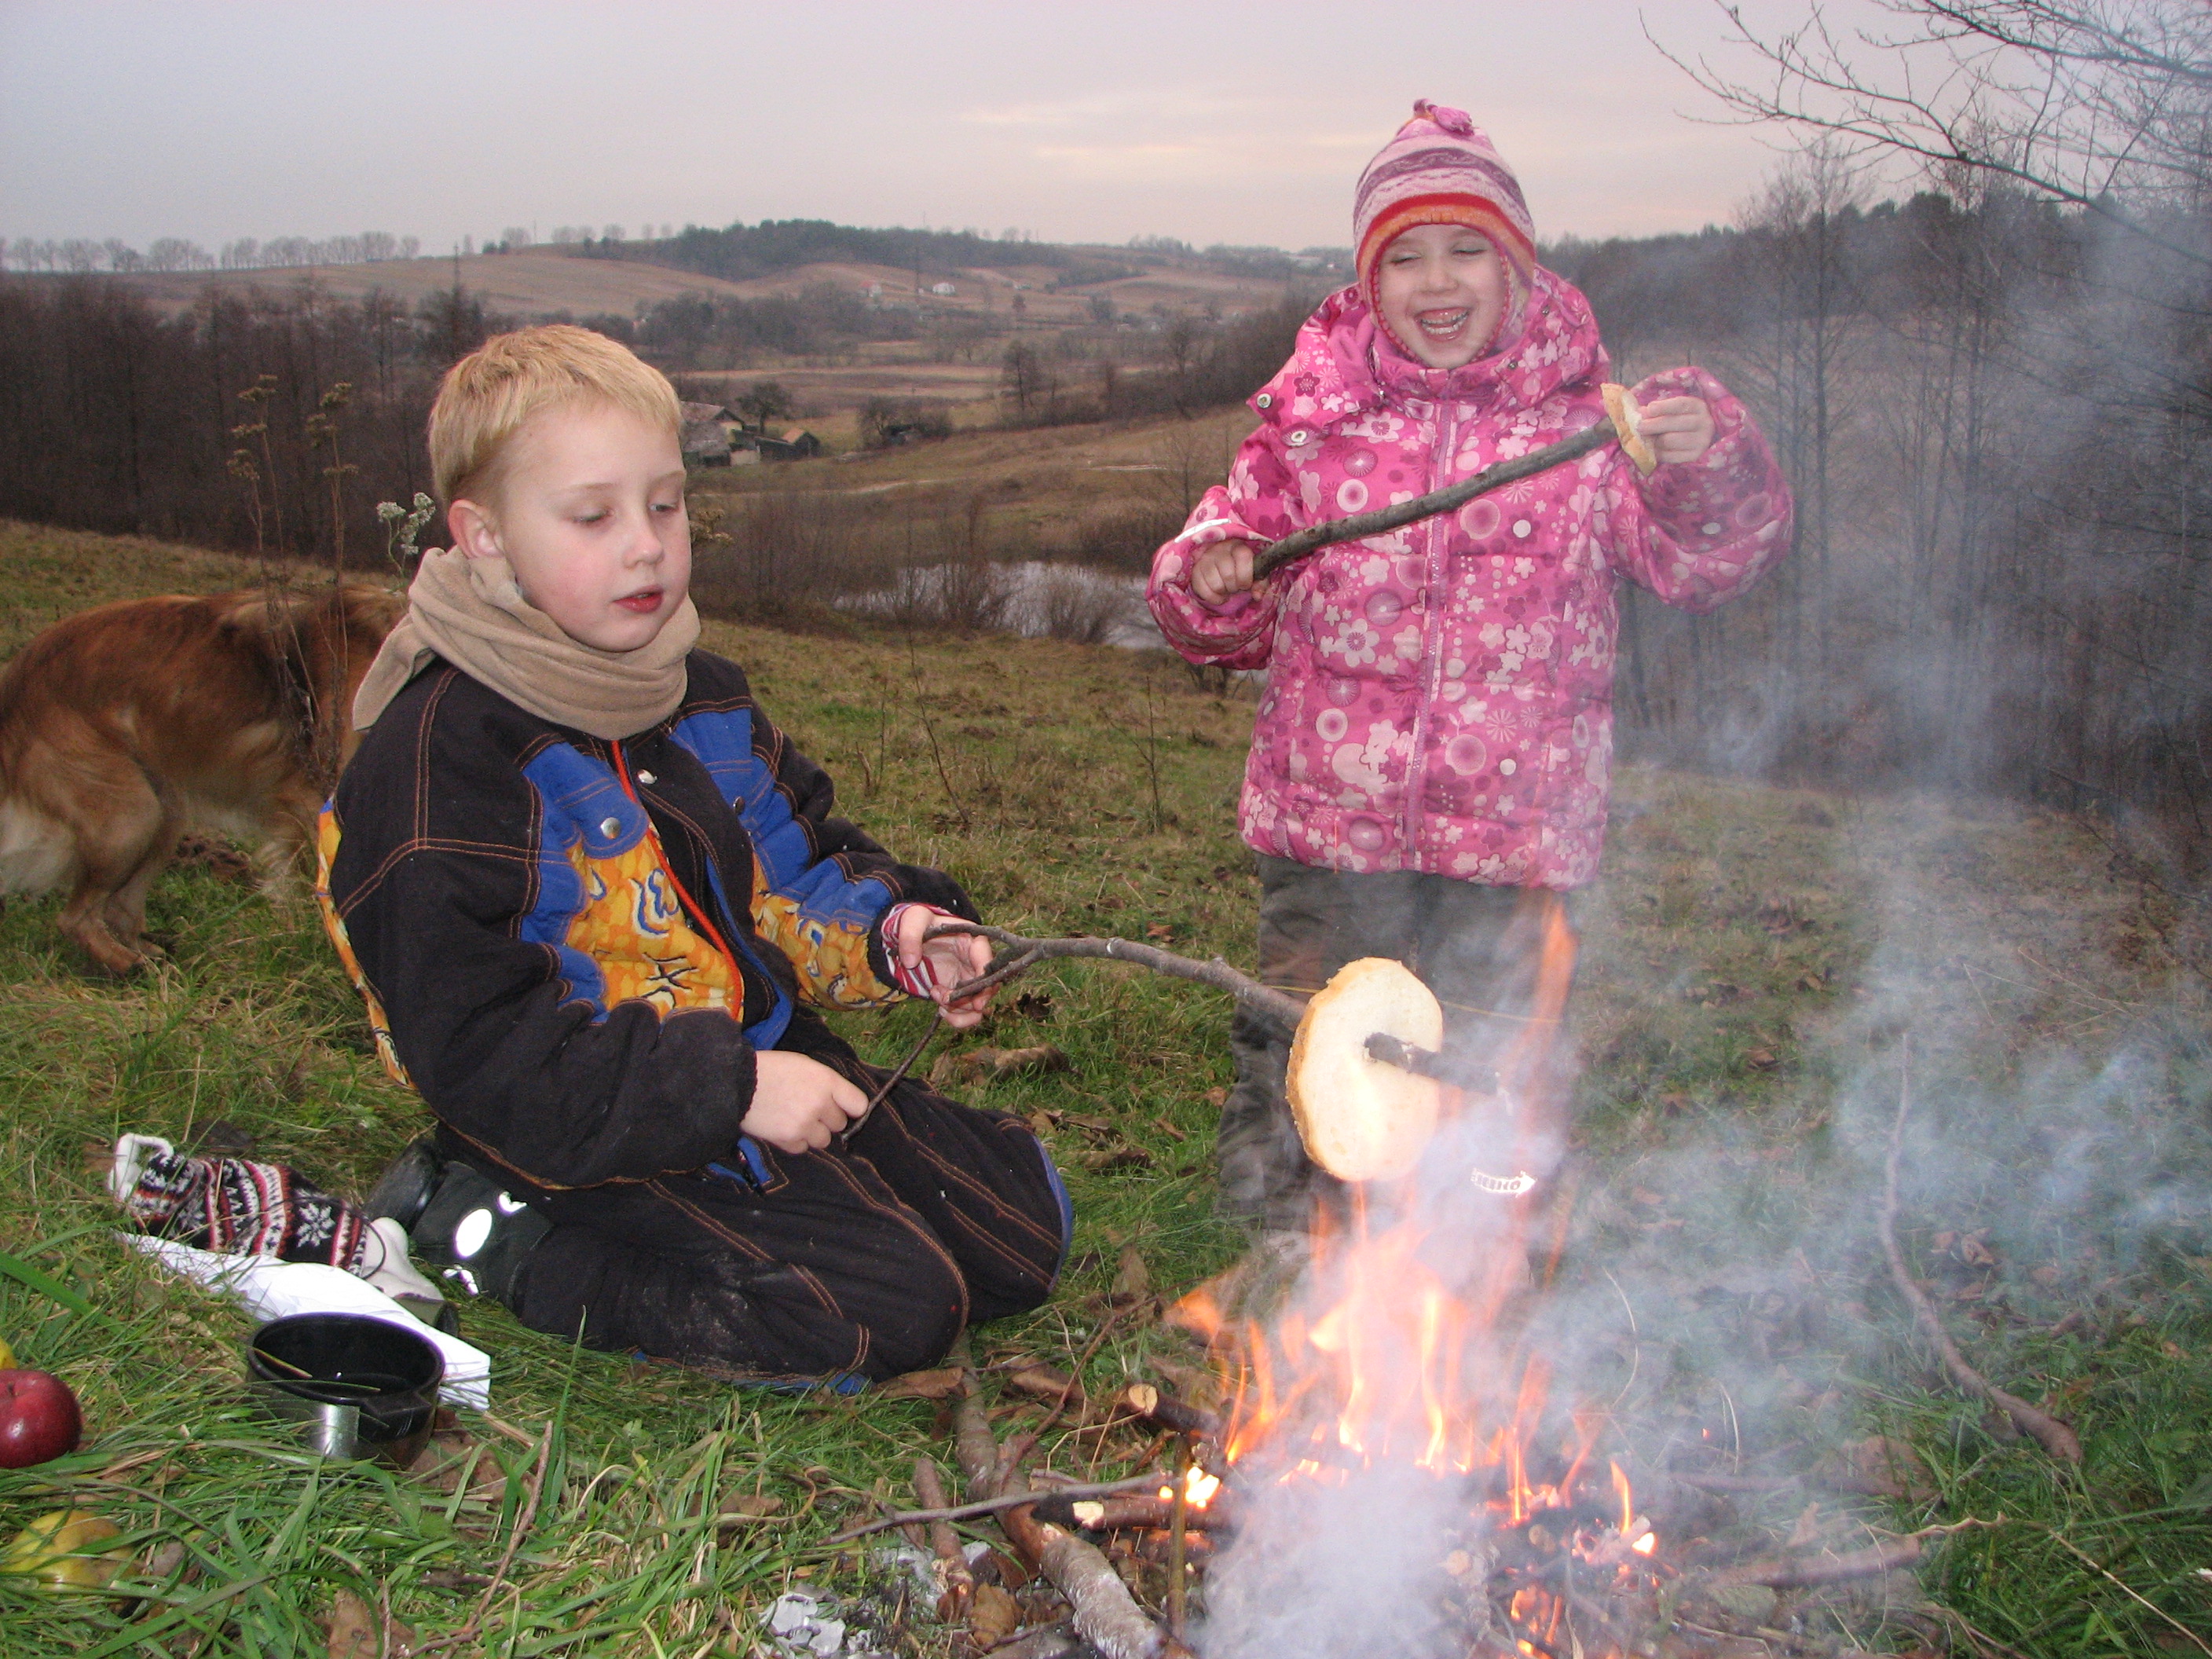 A small boy and a small girl making toasts from bread near fire, picture 2